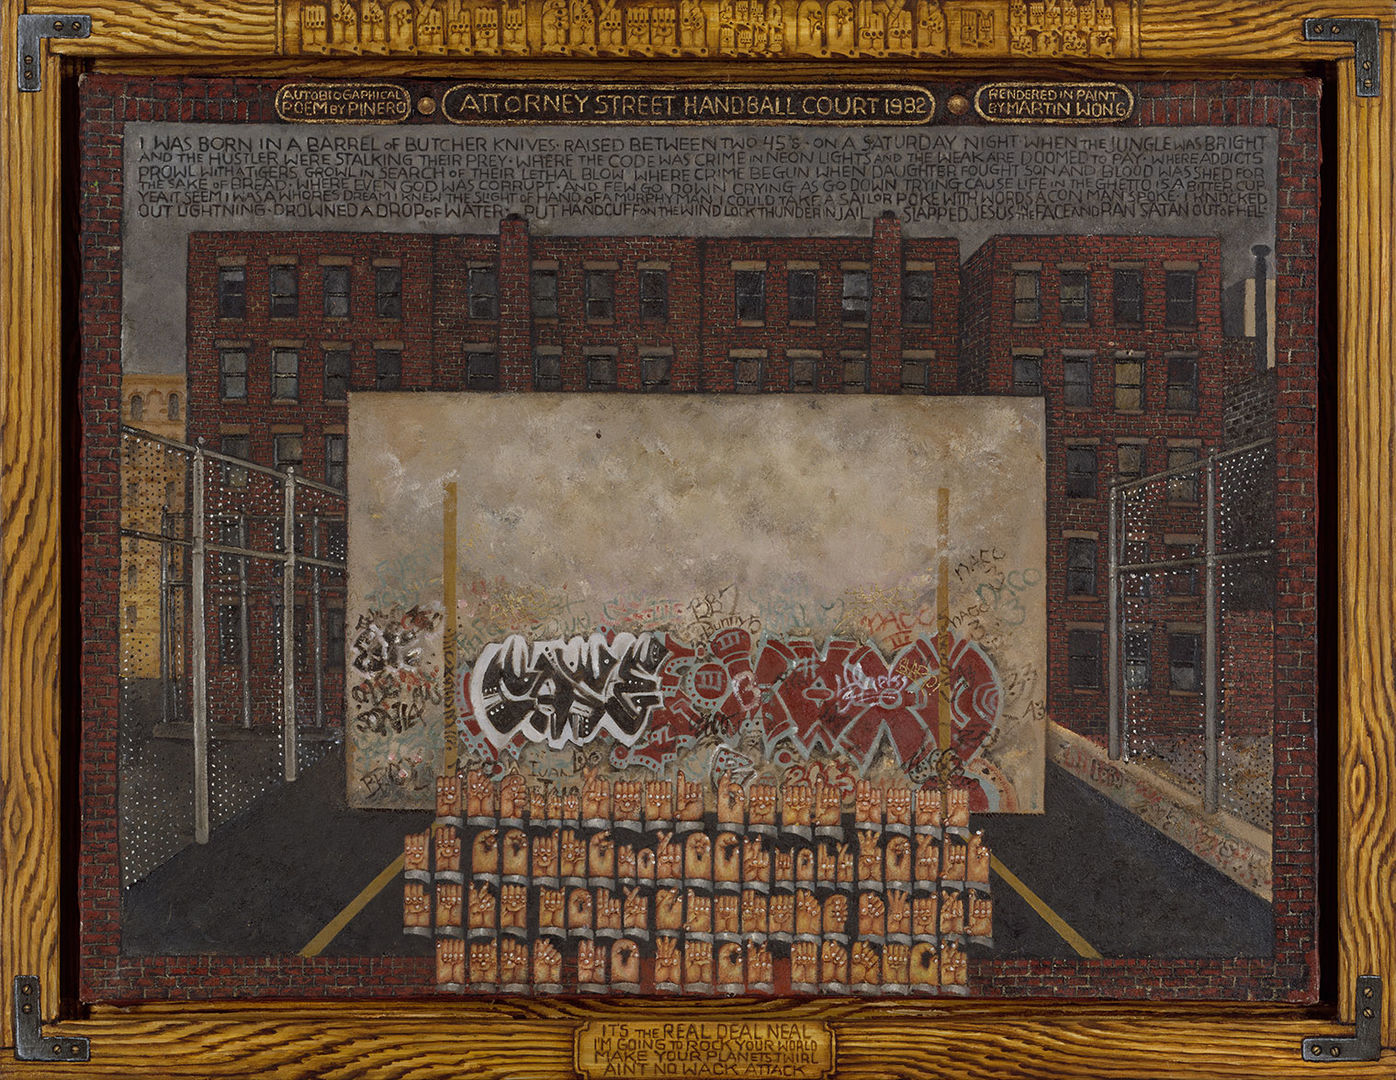 Photograph reproduction of Martin Wong’s artwork titled “Attorney Street (Handball Court with Autobiographical Poem by Piñero)” which depicts a handball court wall tagged with graffiti with several rows of floating, illustrated hands gesturing in the foreground.